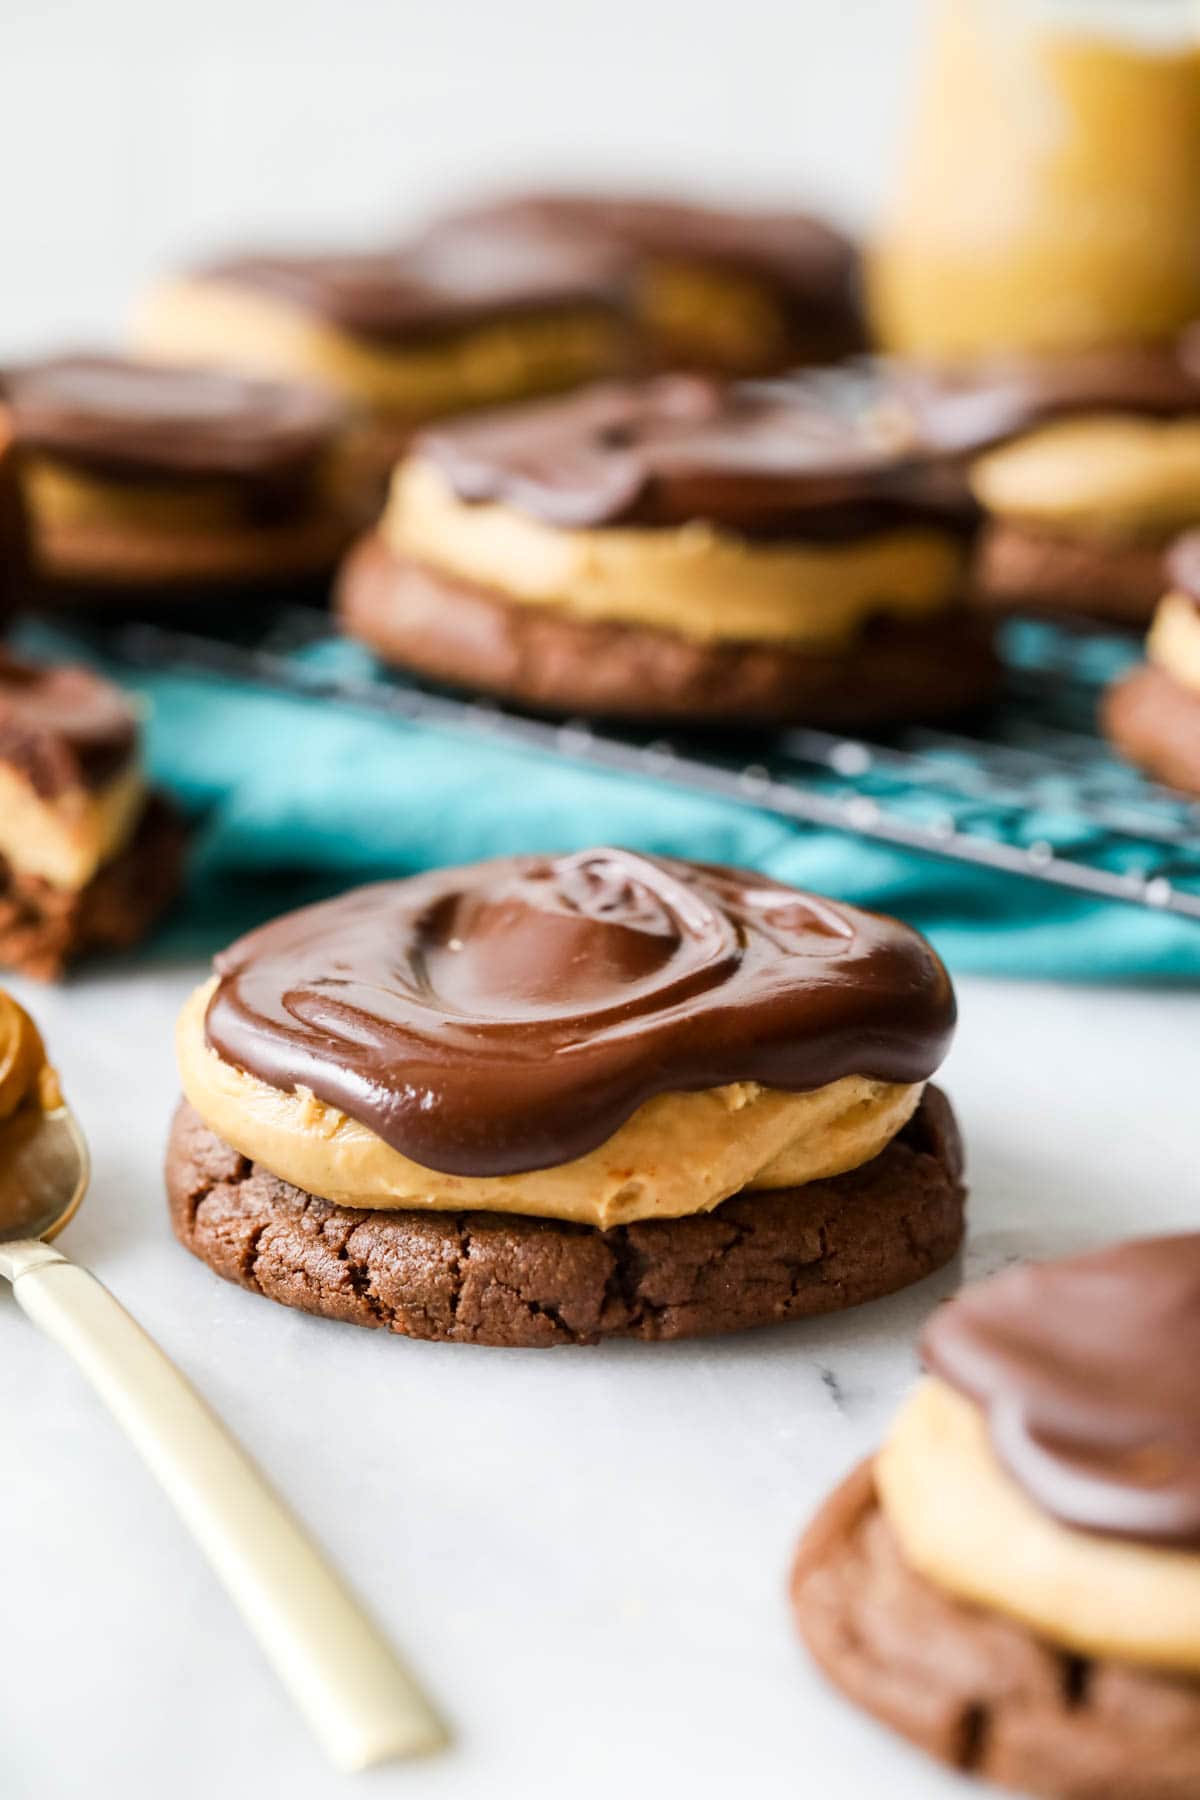 Buckeye cookie consisting of a chocolate cookie topped with peanut butter and chocolate.